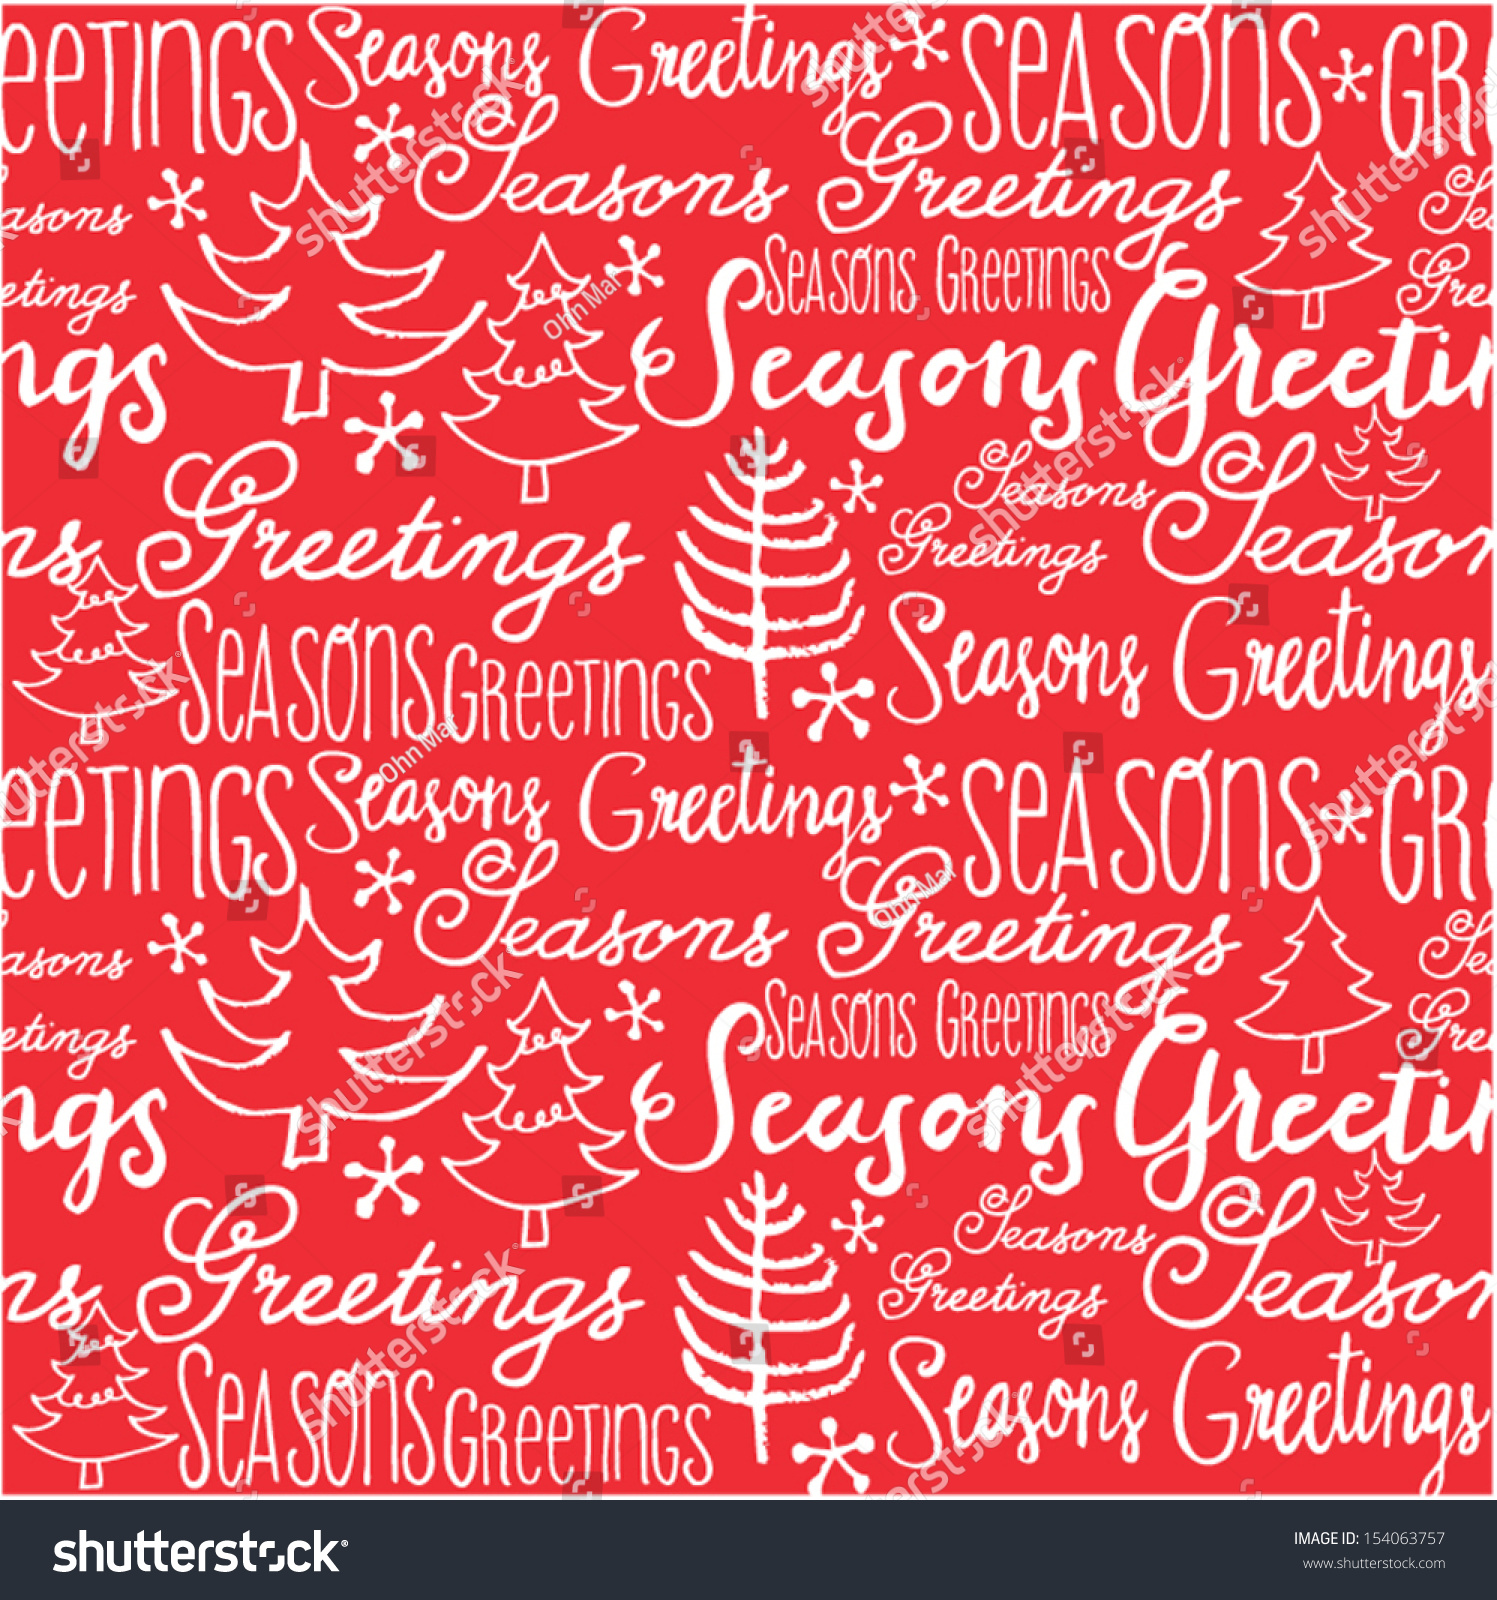 Christmas trees and words seamless vector background